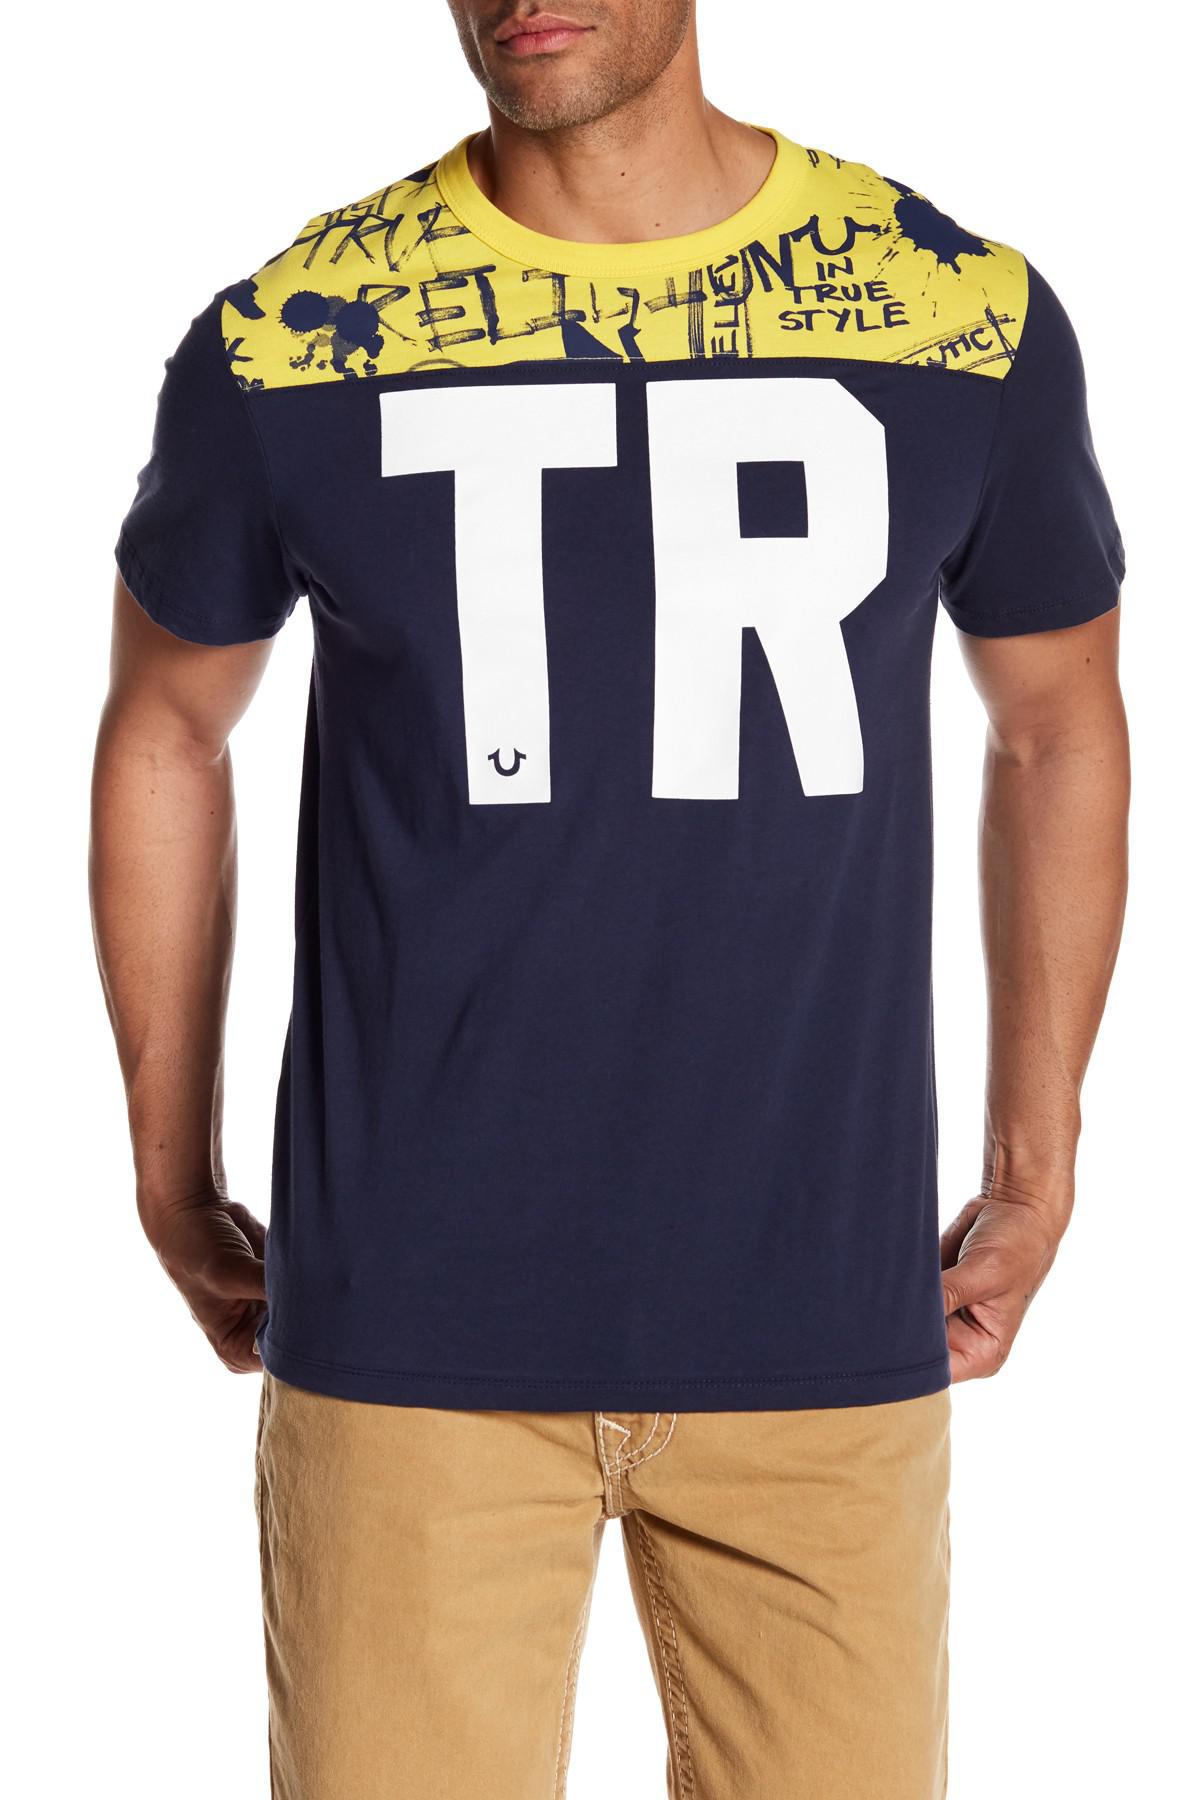 blue and yellow true religion shirt